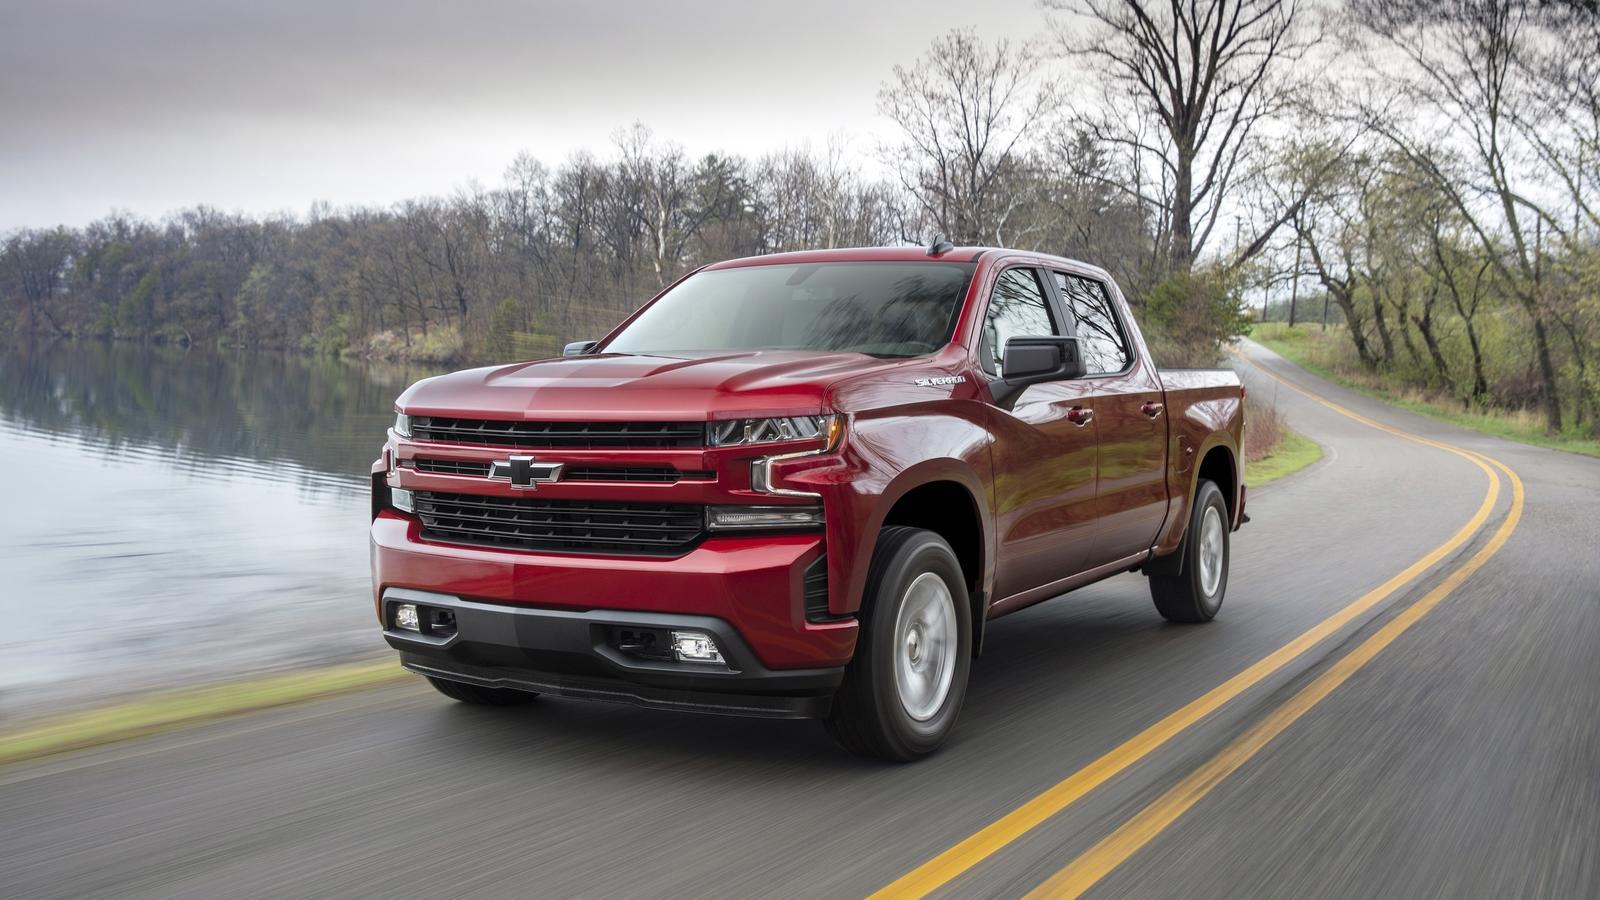 Chevrolet Silverado: Latest News, Reviews, Specifications, Prices, Photo And Videos